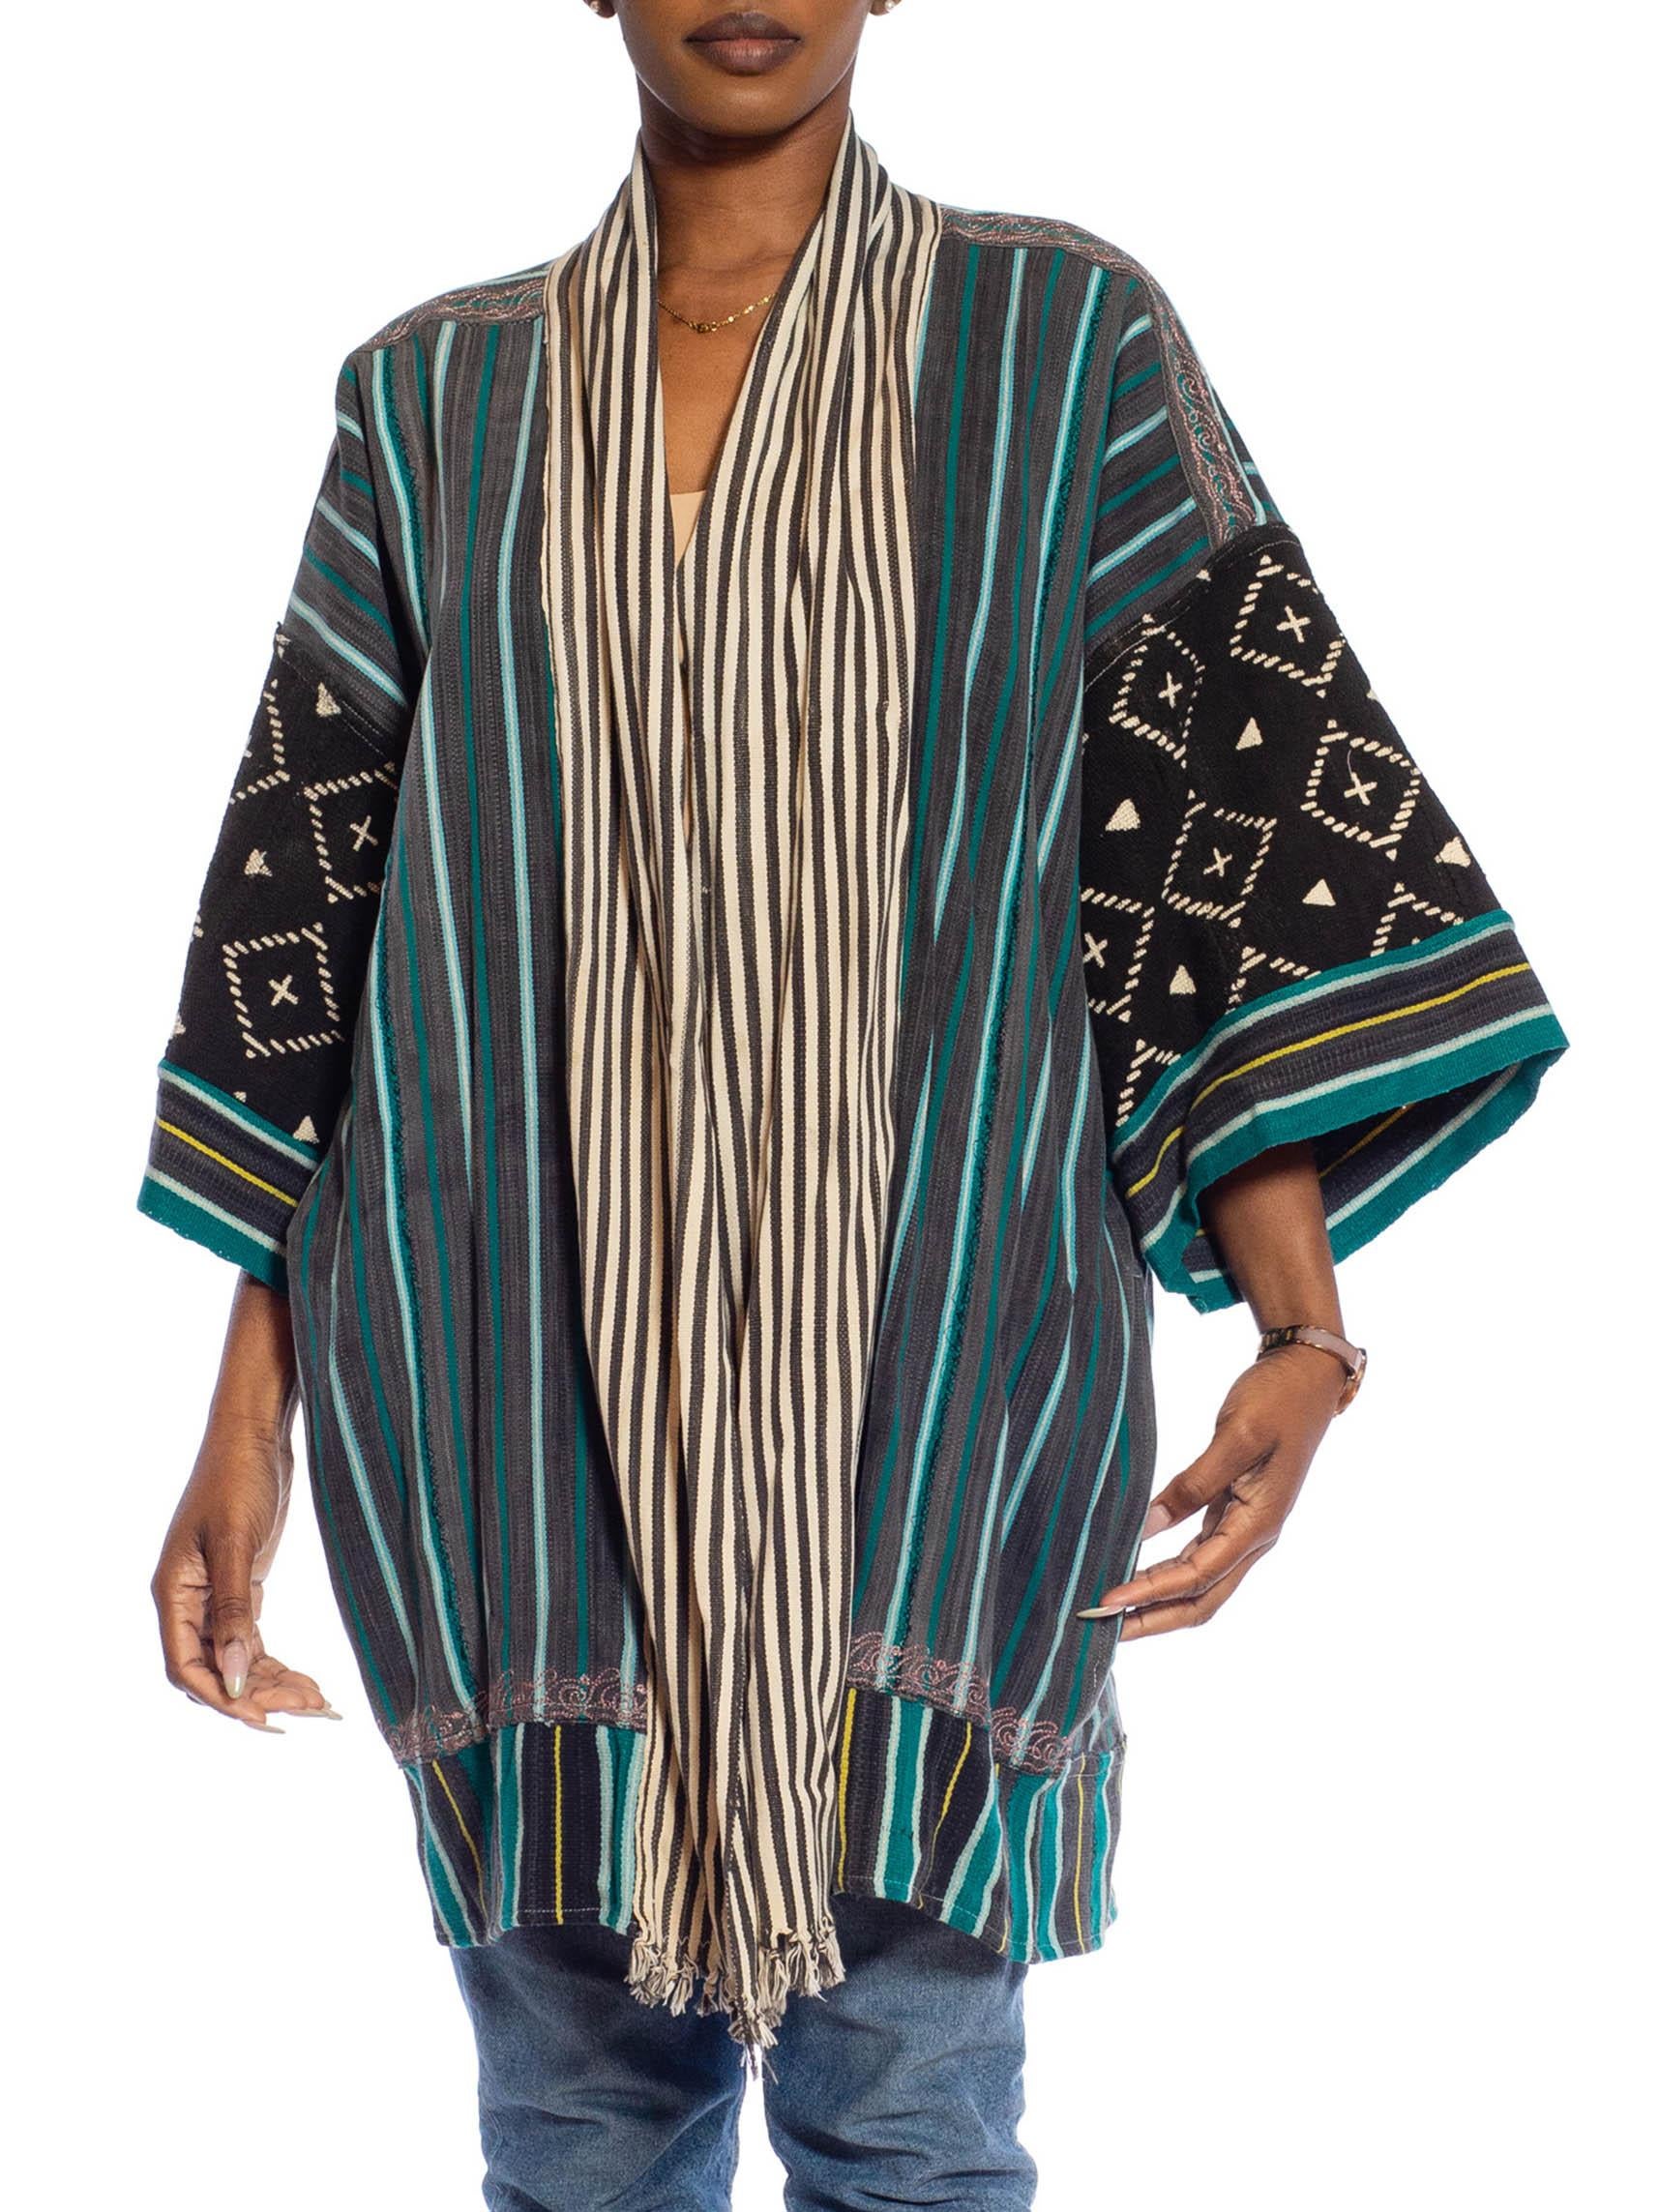 MORPHEW COLLECTION Black, Teal & Grey African Cotton Indigo Stripe Black Tie-Dye Duster
MORPHEW COLLECTION is made entirely by hand in our NYC Ateliér of rare antique materials sourced from around the globe. Our sustainable vintage materials